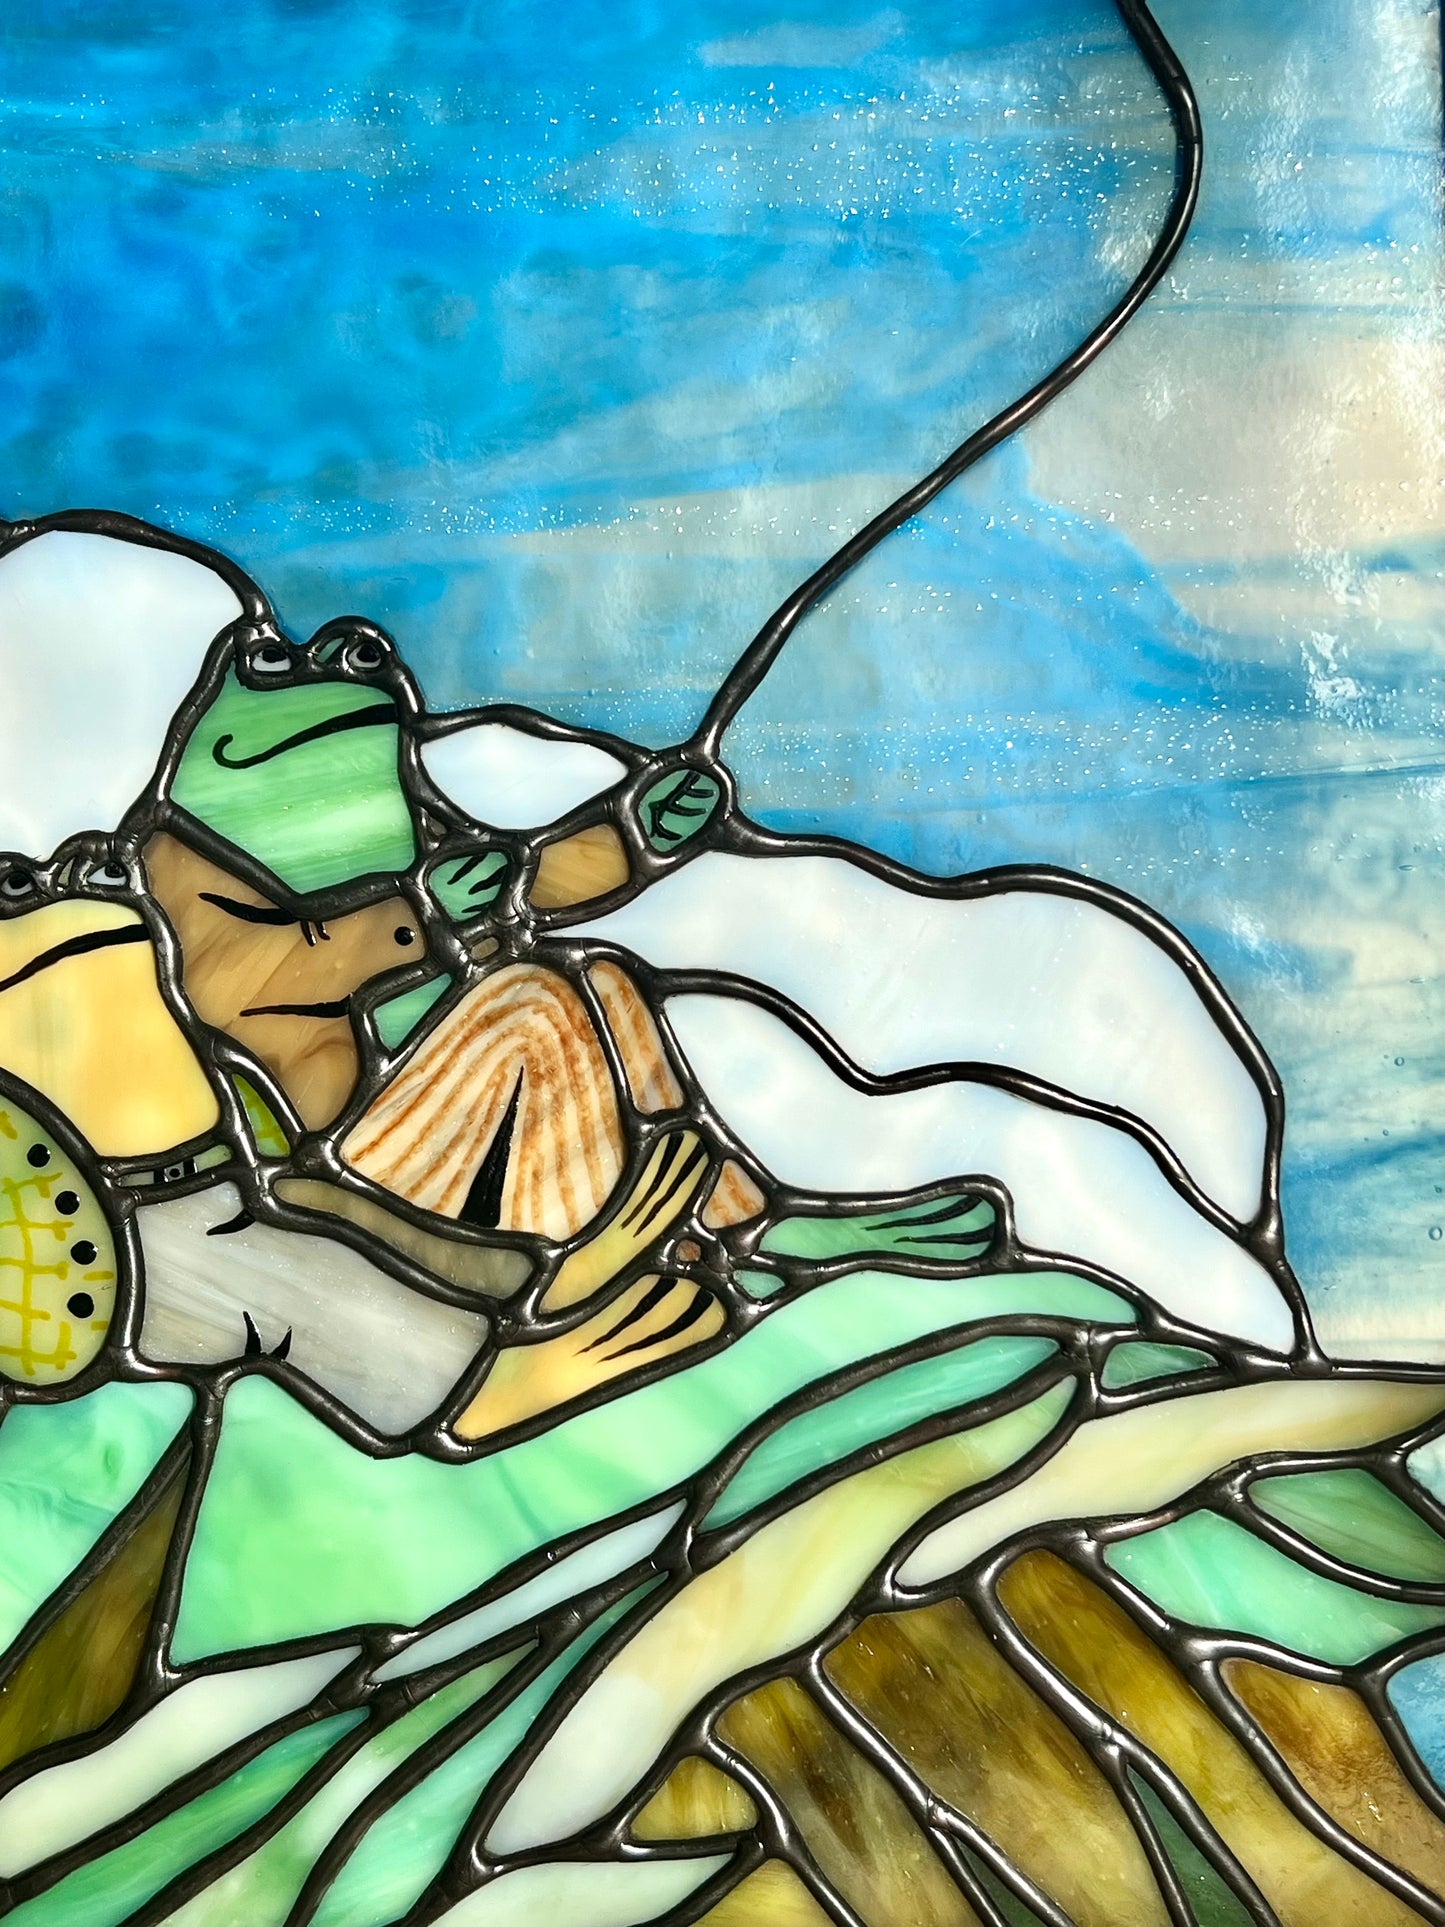 The Kite / Frog and Toad